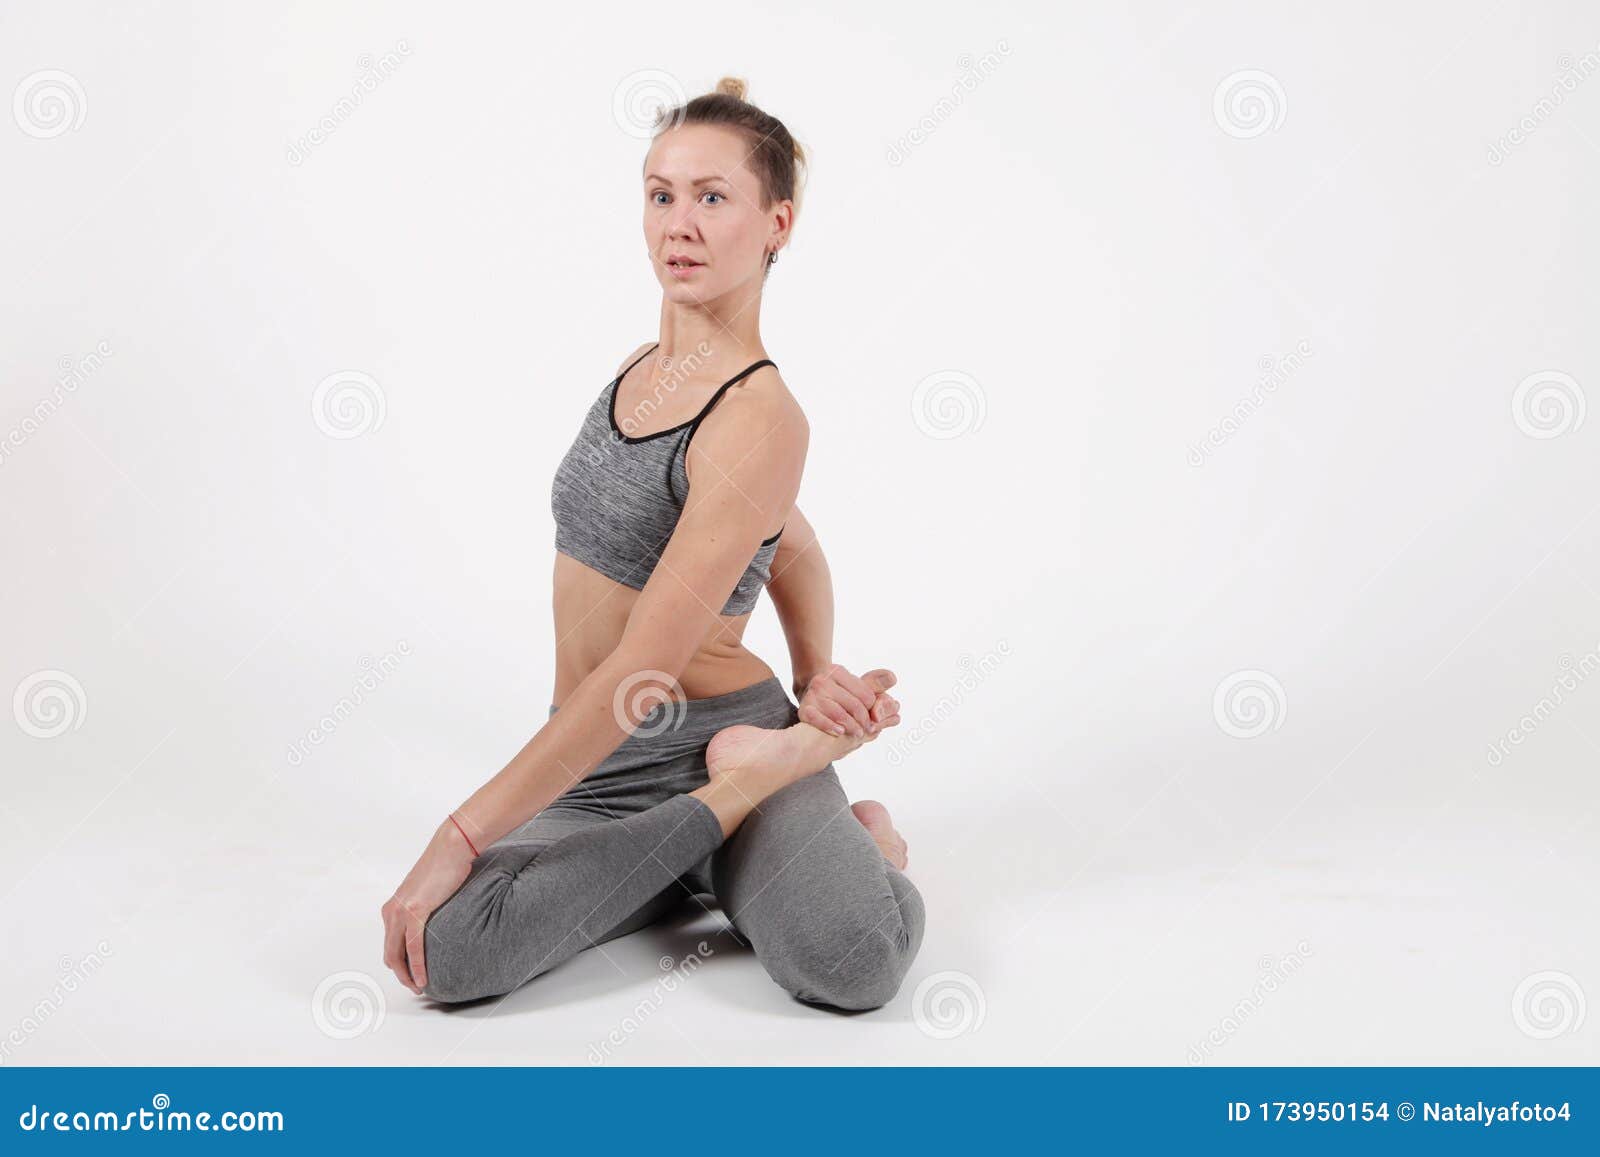 233 Yoga Exercise Lean Forward Stock Video Footage - 4K and HD Video Clips  | Shutterstock